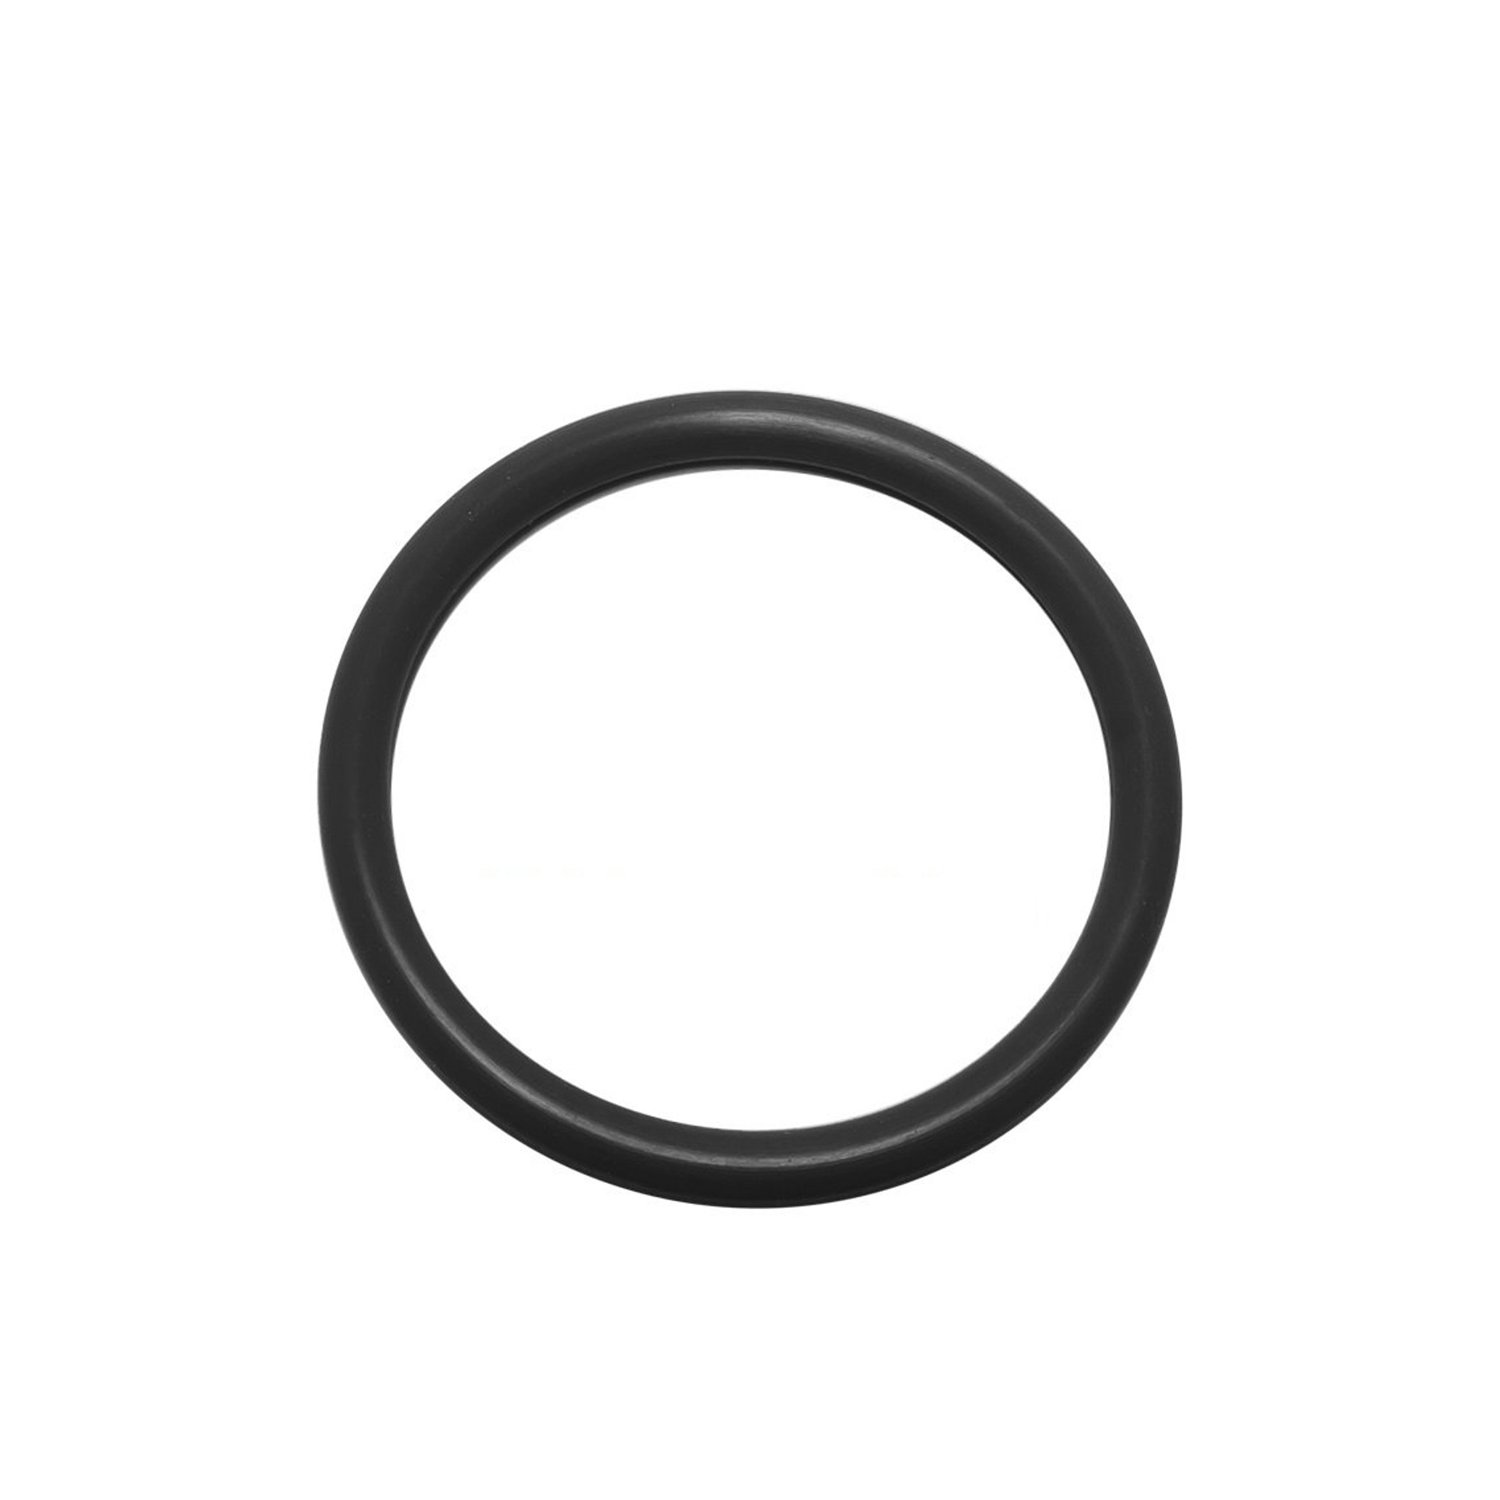 O-rings 10.82 x 1.78 mm 1 pc HNBR rubber, for air conditioners R12 & R134a